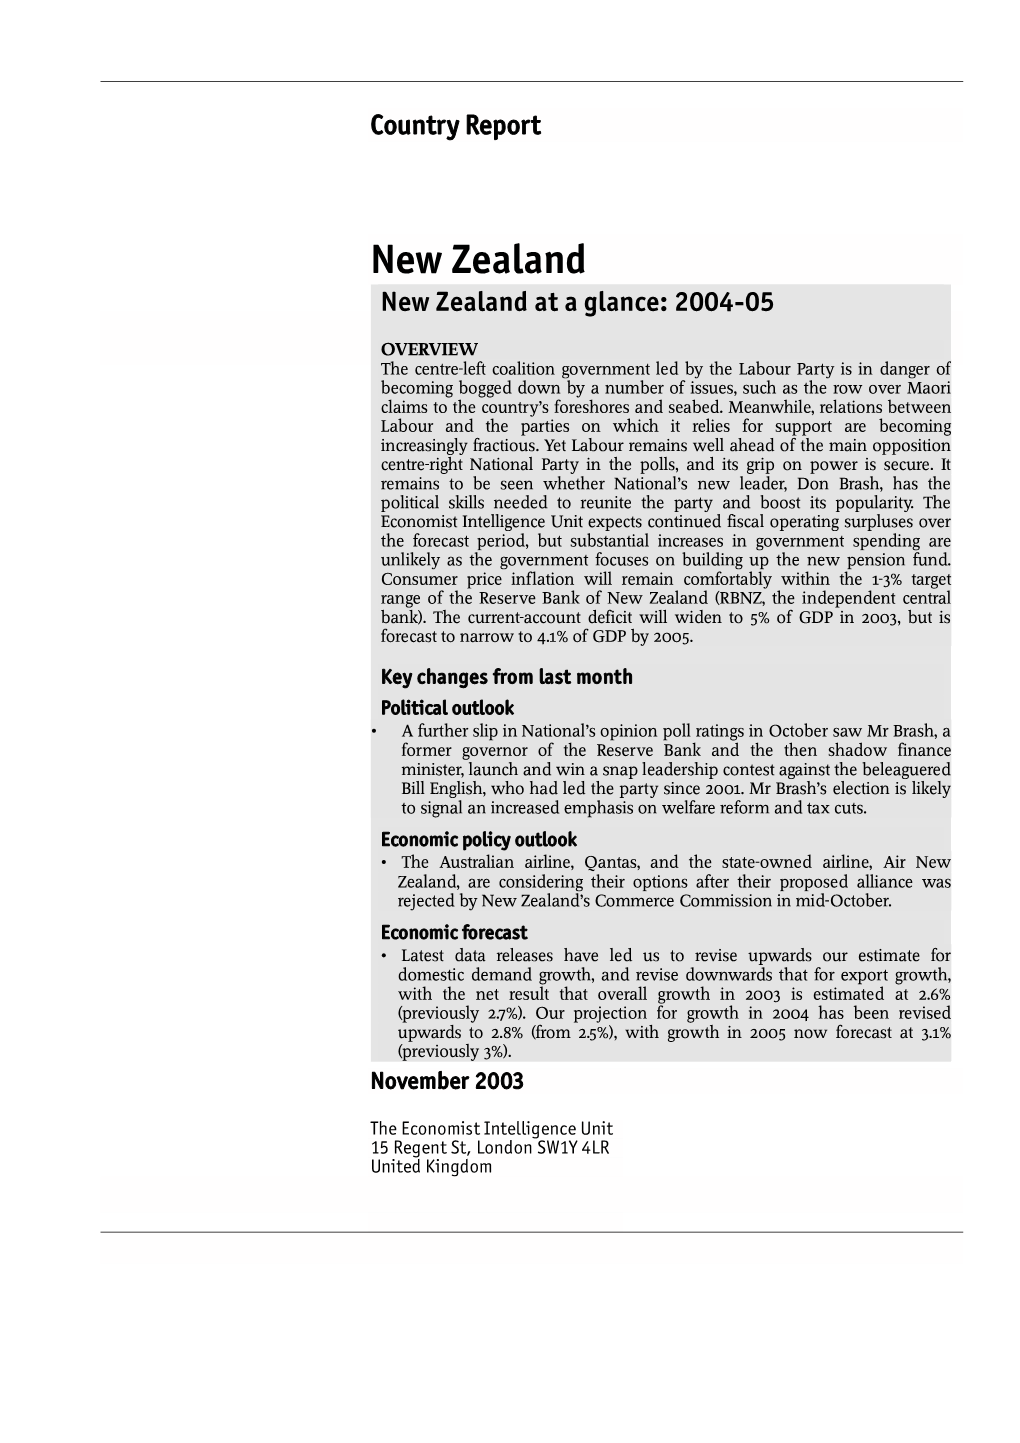 New Zealand New Zealand at a Glance: 2004-05